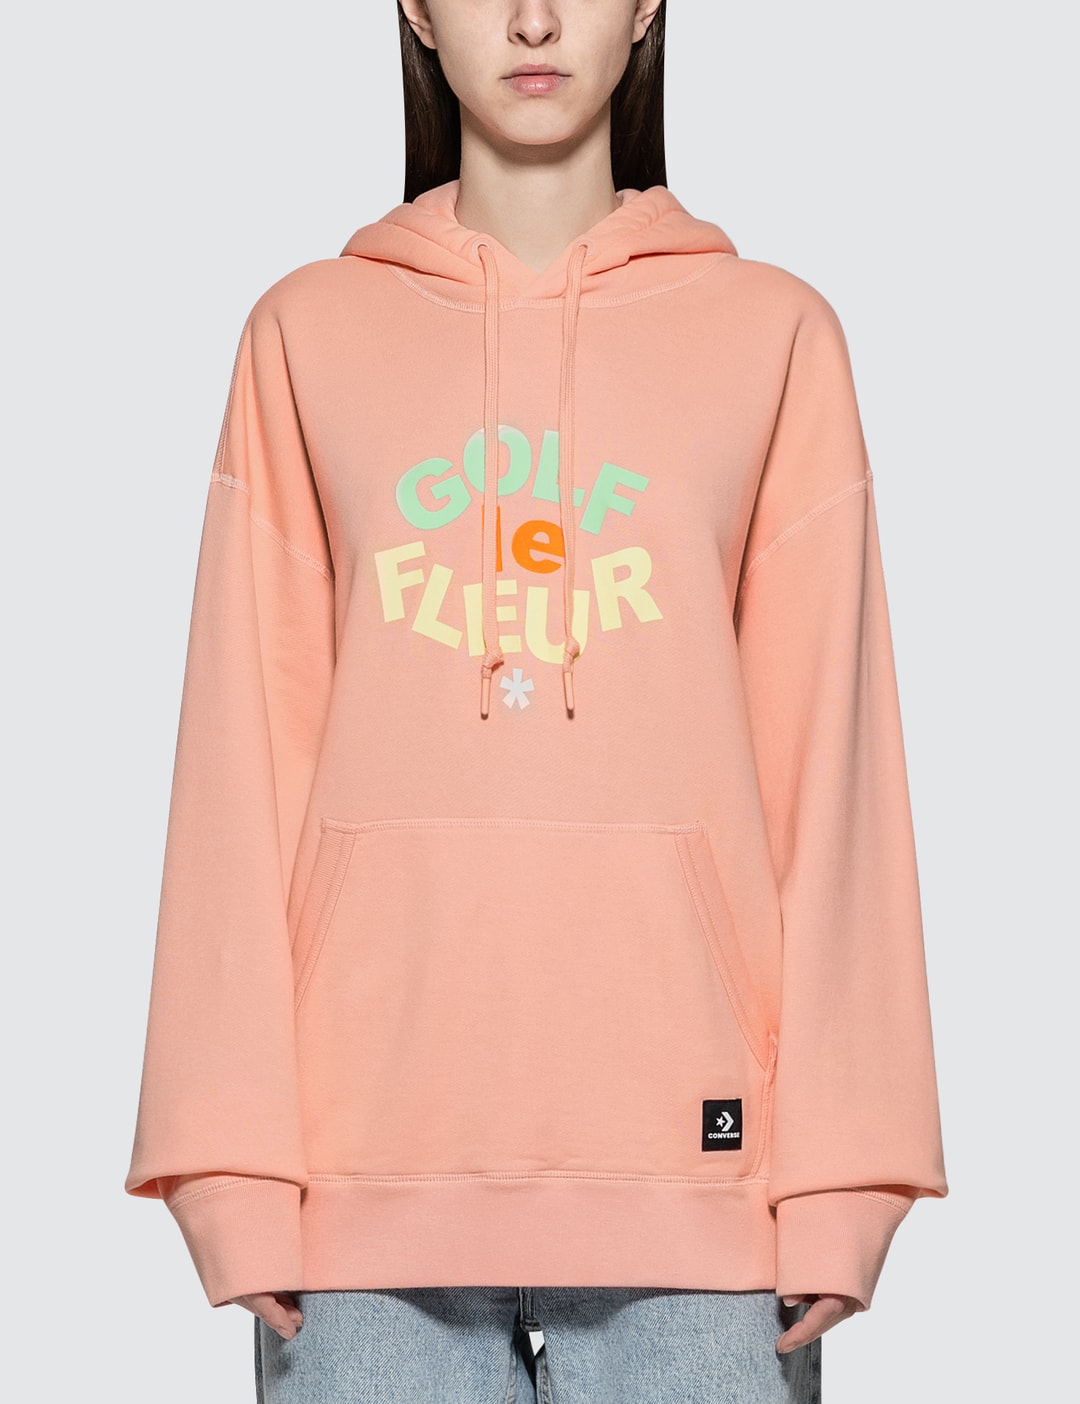 Converse - Golf Le Fleur X Converse Hoodie | HBX Globally Curated Fashion Lifestyle by Hypebeast